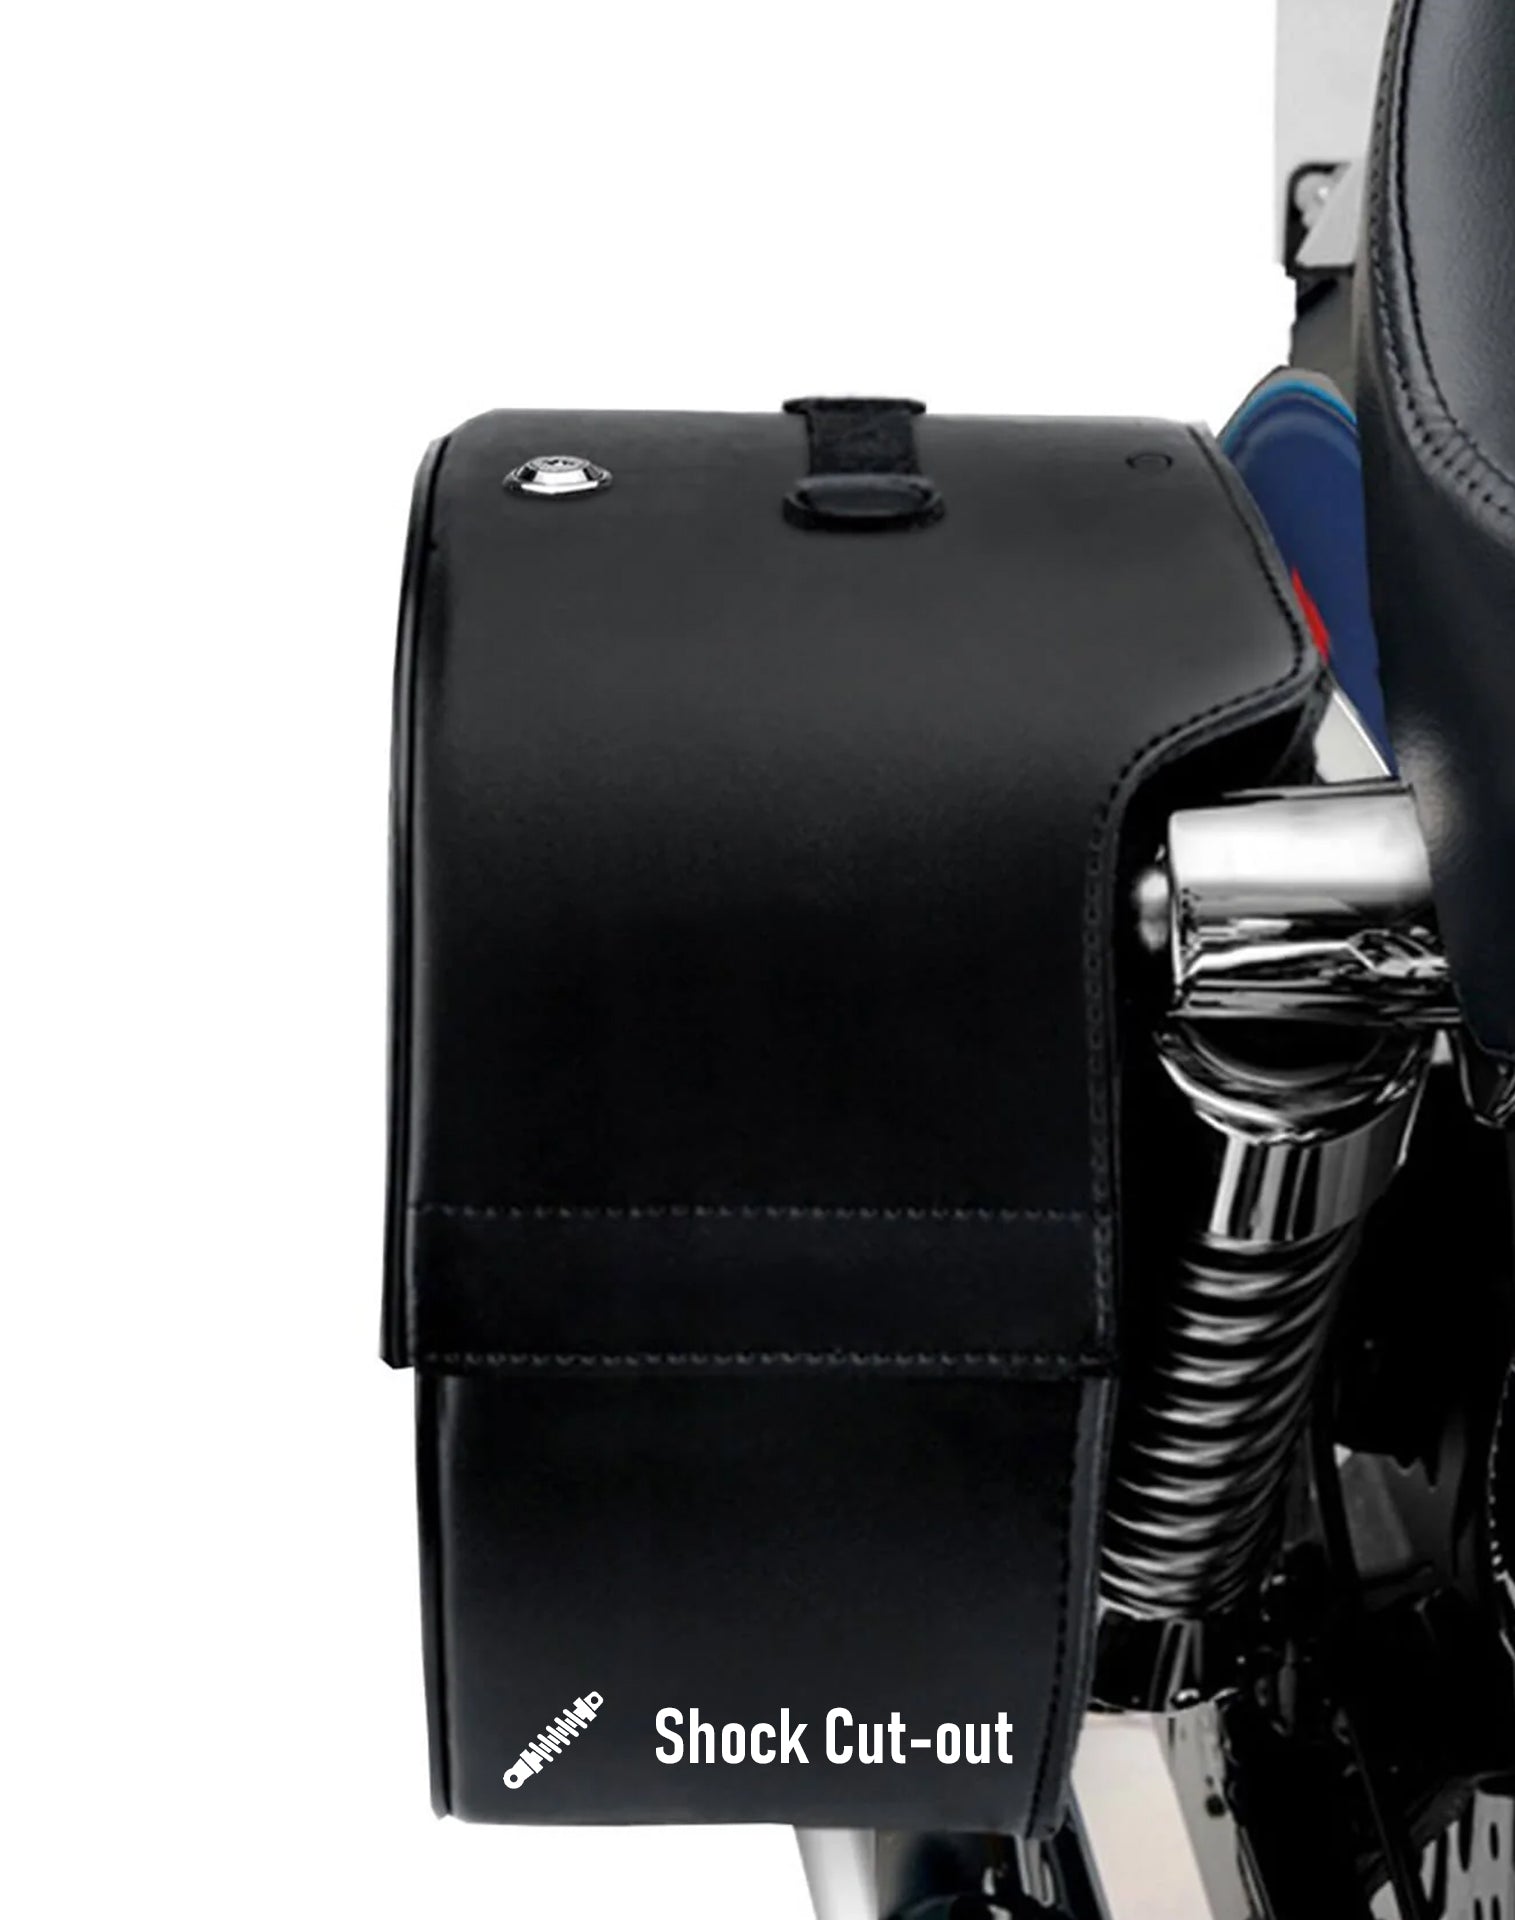 Viking Club Large Triumph Rocket Iii Touring Shock Cut Out Leather Motorcycle Saddlebags are Durable